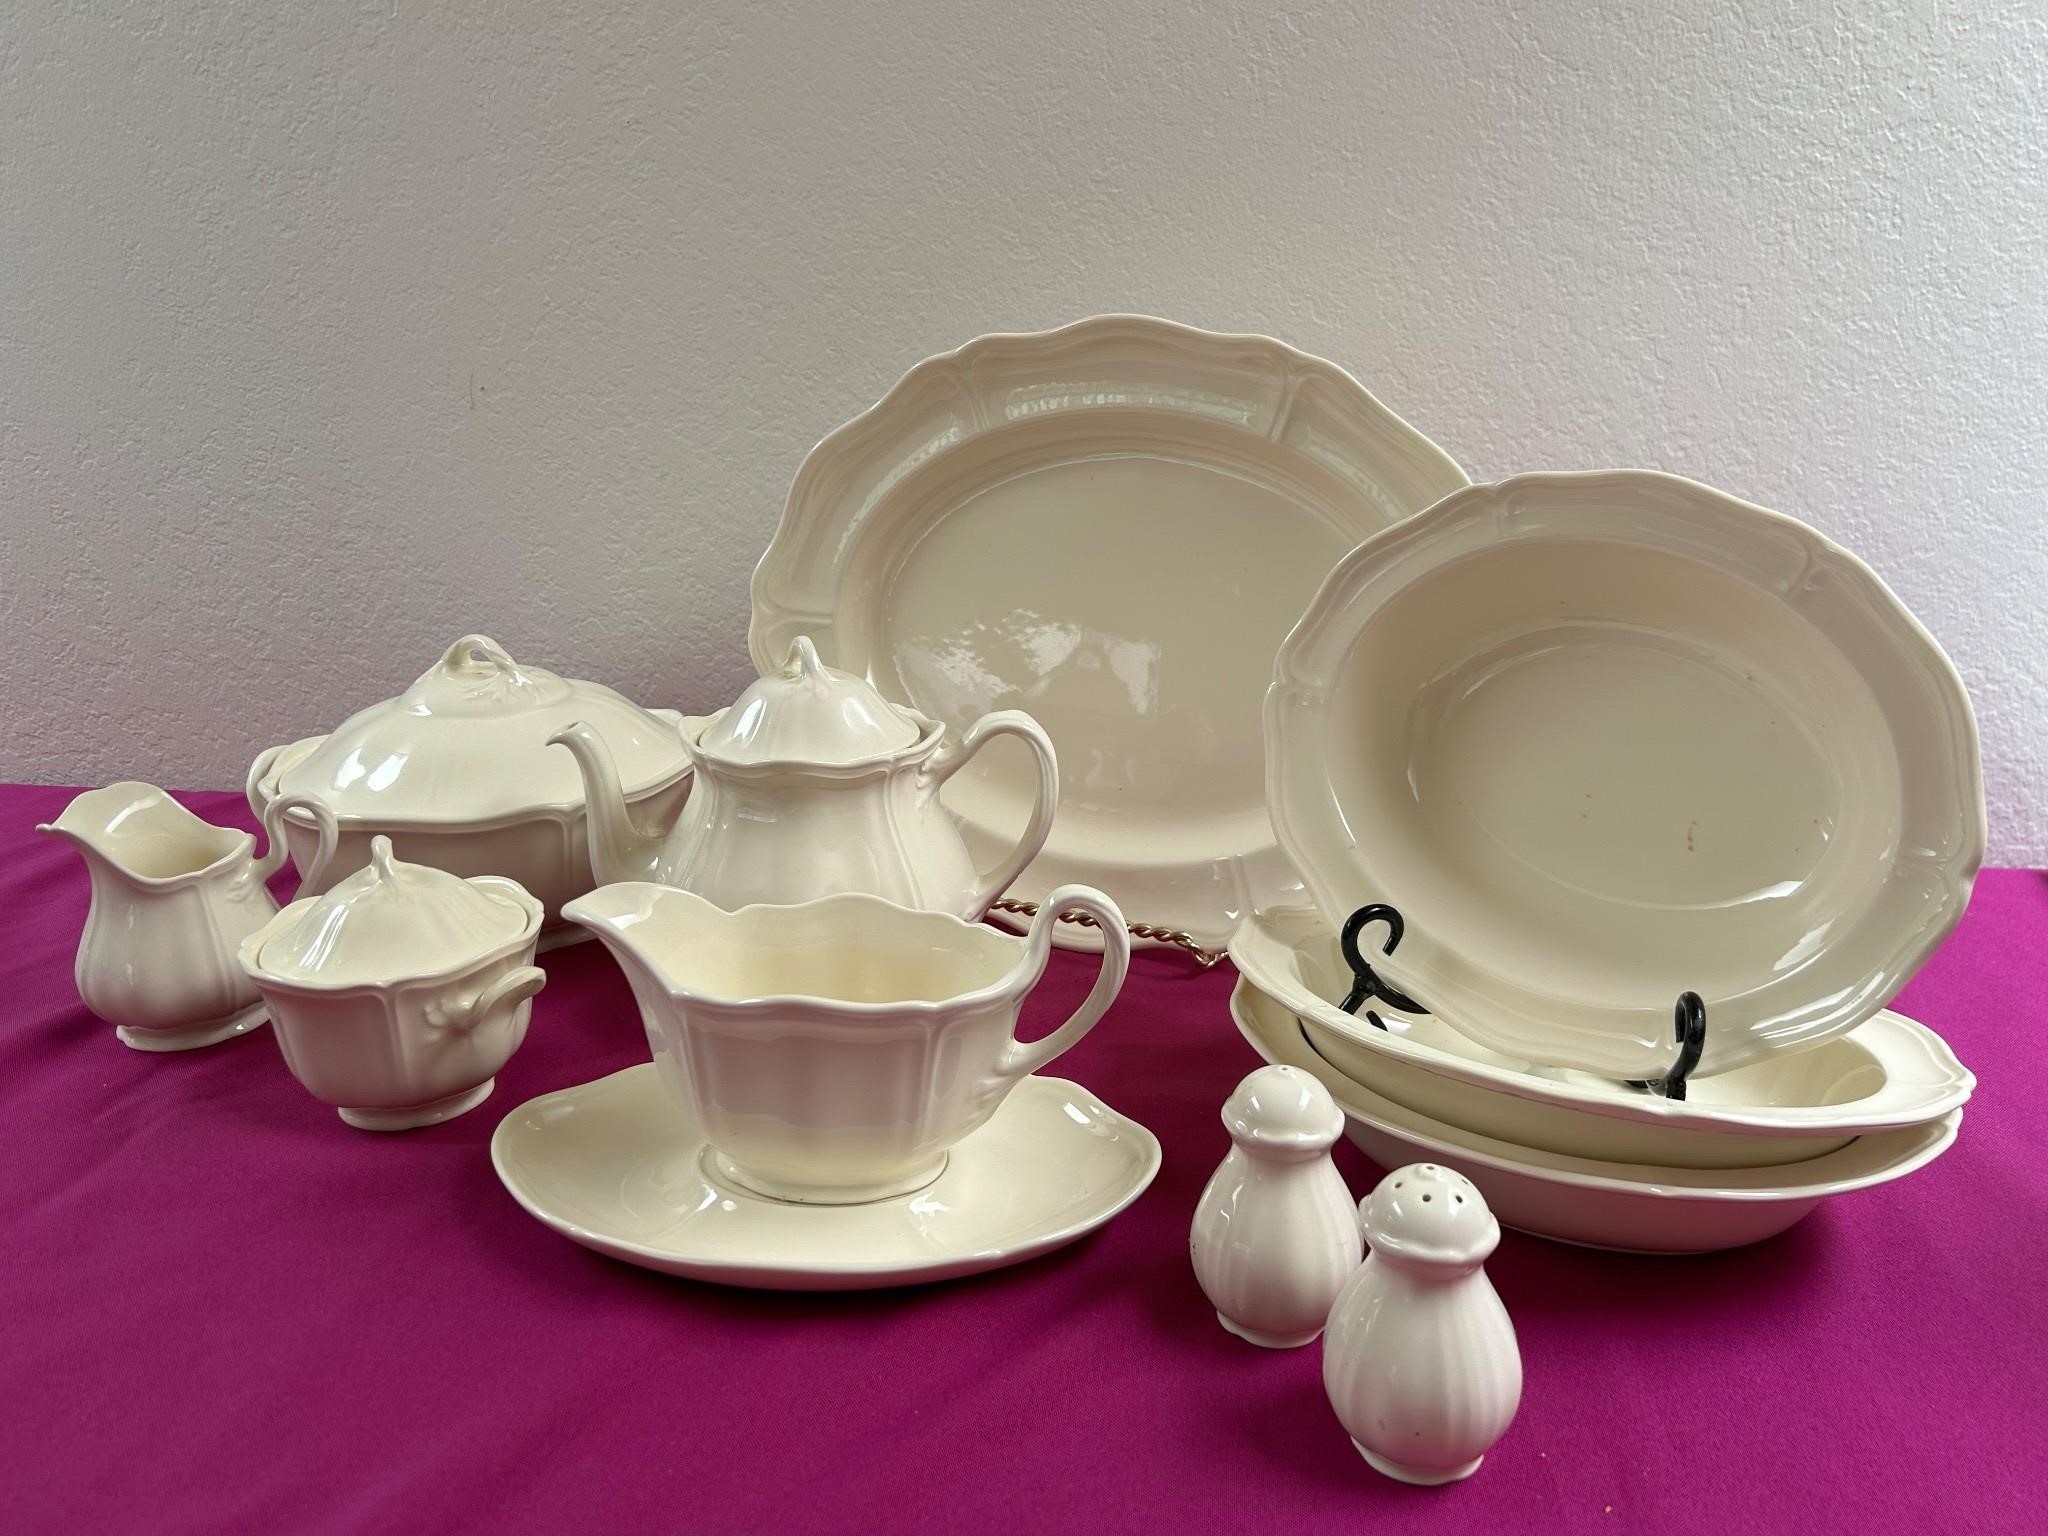 ‘Queens Plain’ by Wedgwood China Serving Pieces